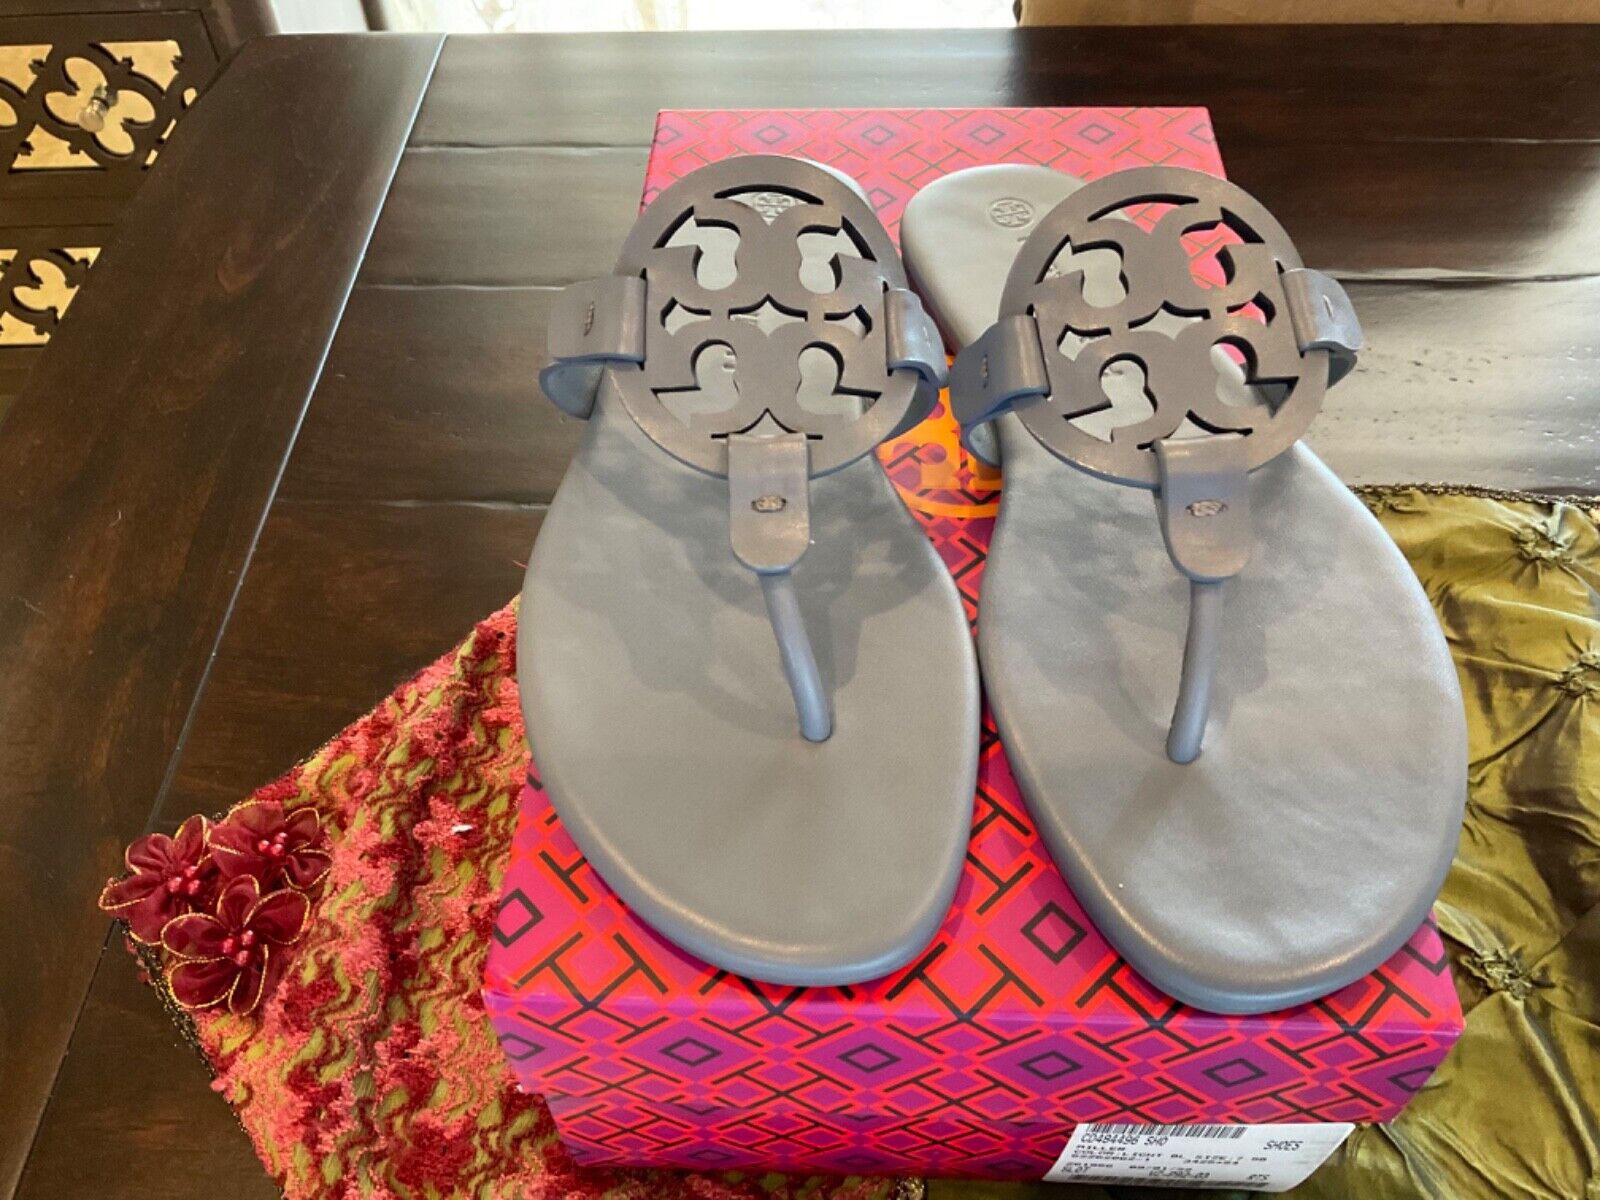 Tory Burch Miller Sandals Light blue ,size , sold out, HTF,BNIB, must  have ! | eBay